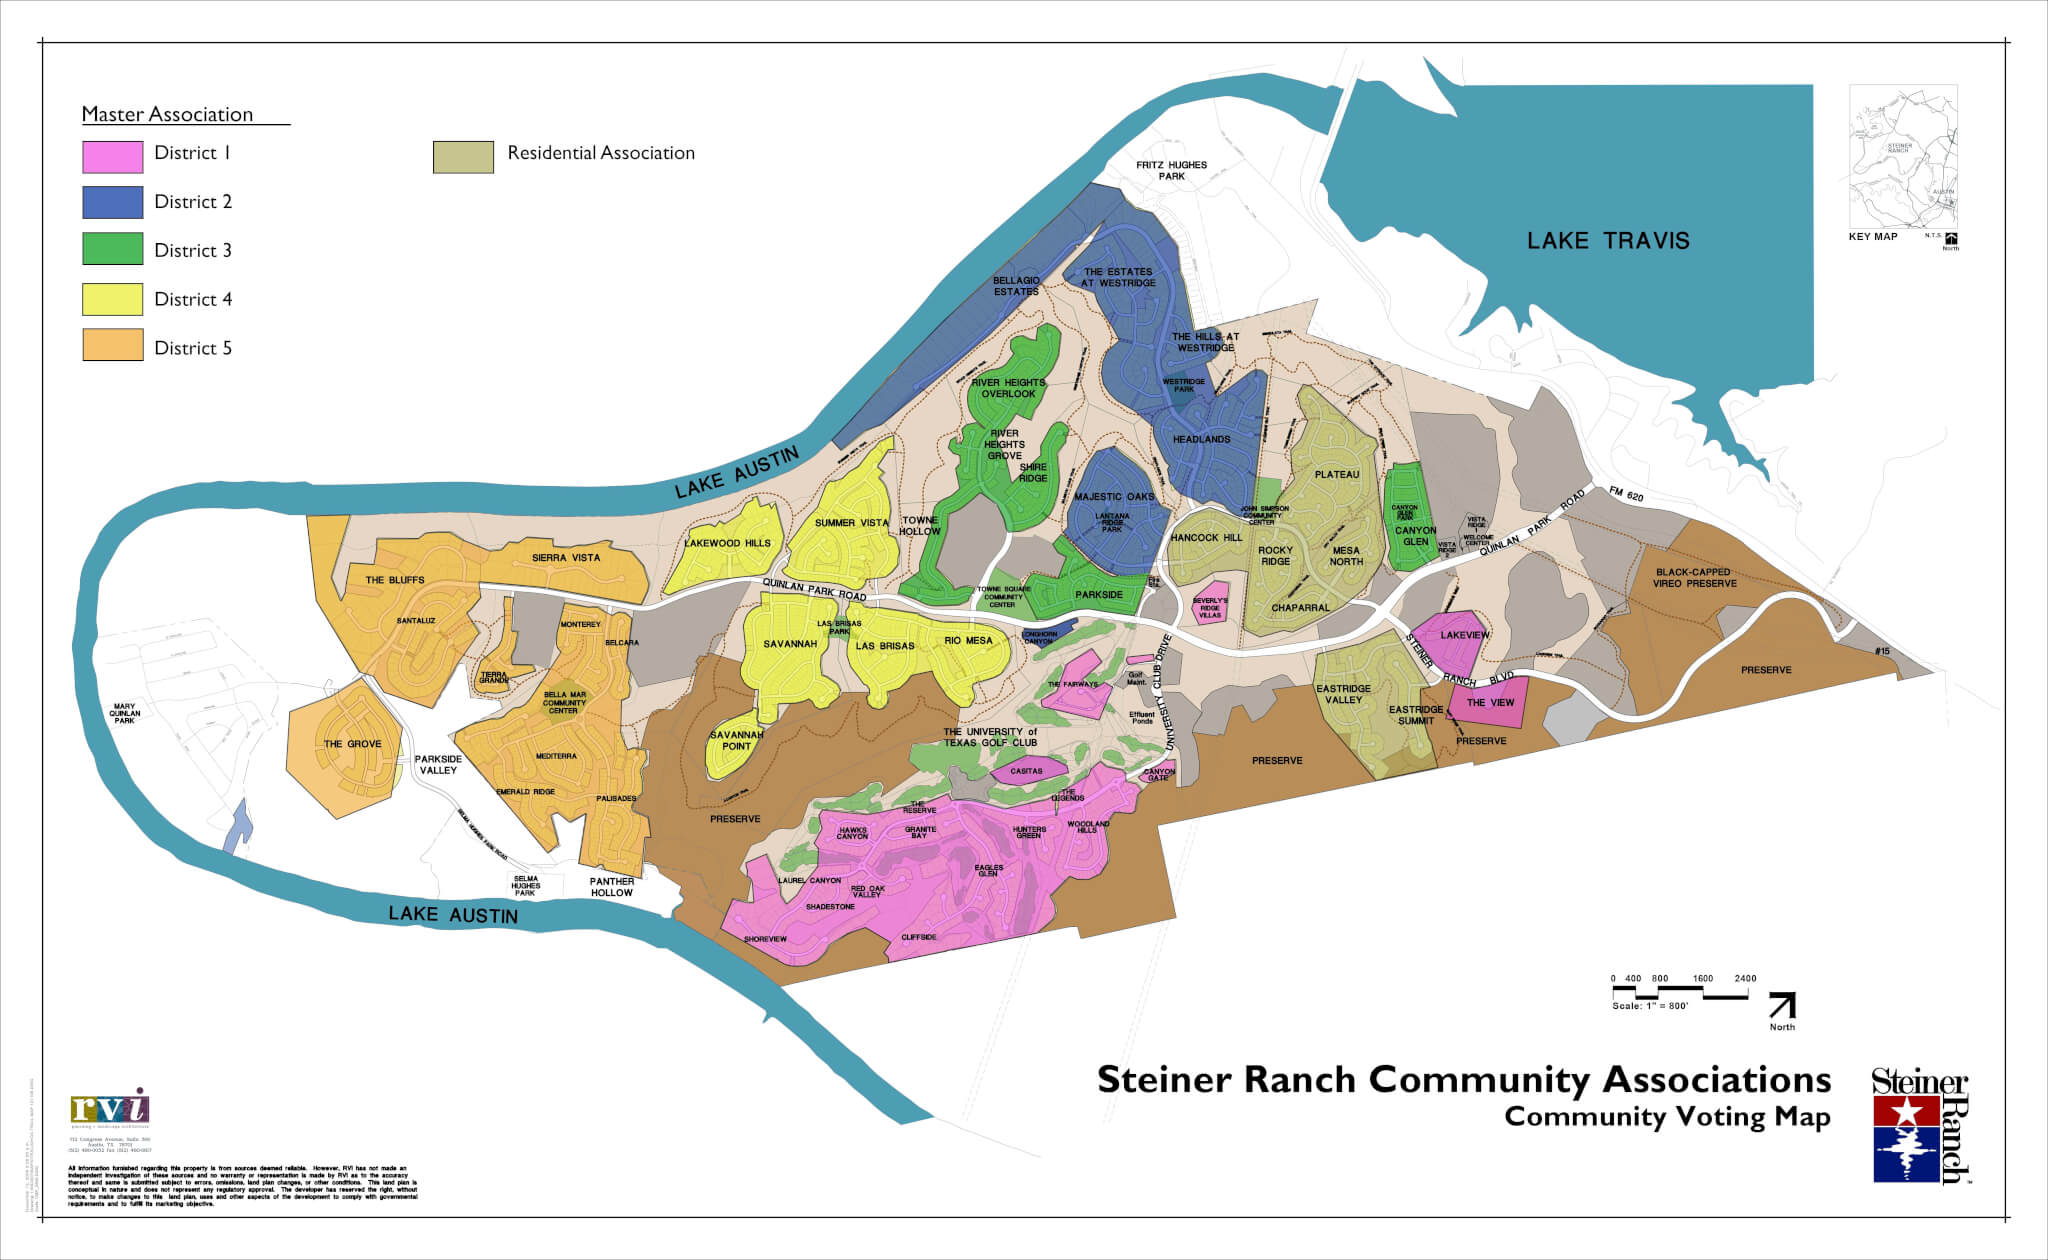 The newly formed voting districts are comprised of neighborhoods within the Steiner Ranch Master Association that are similar in size and location.